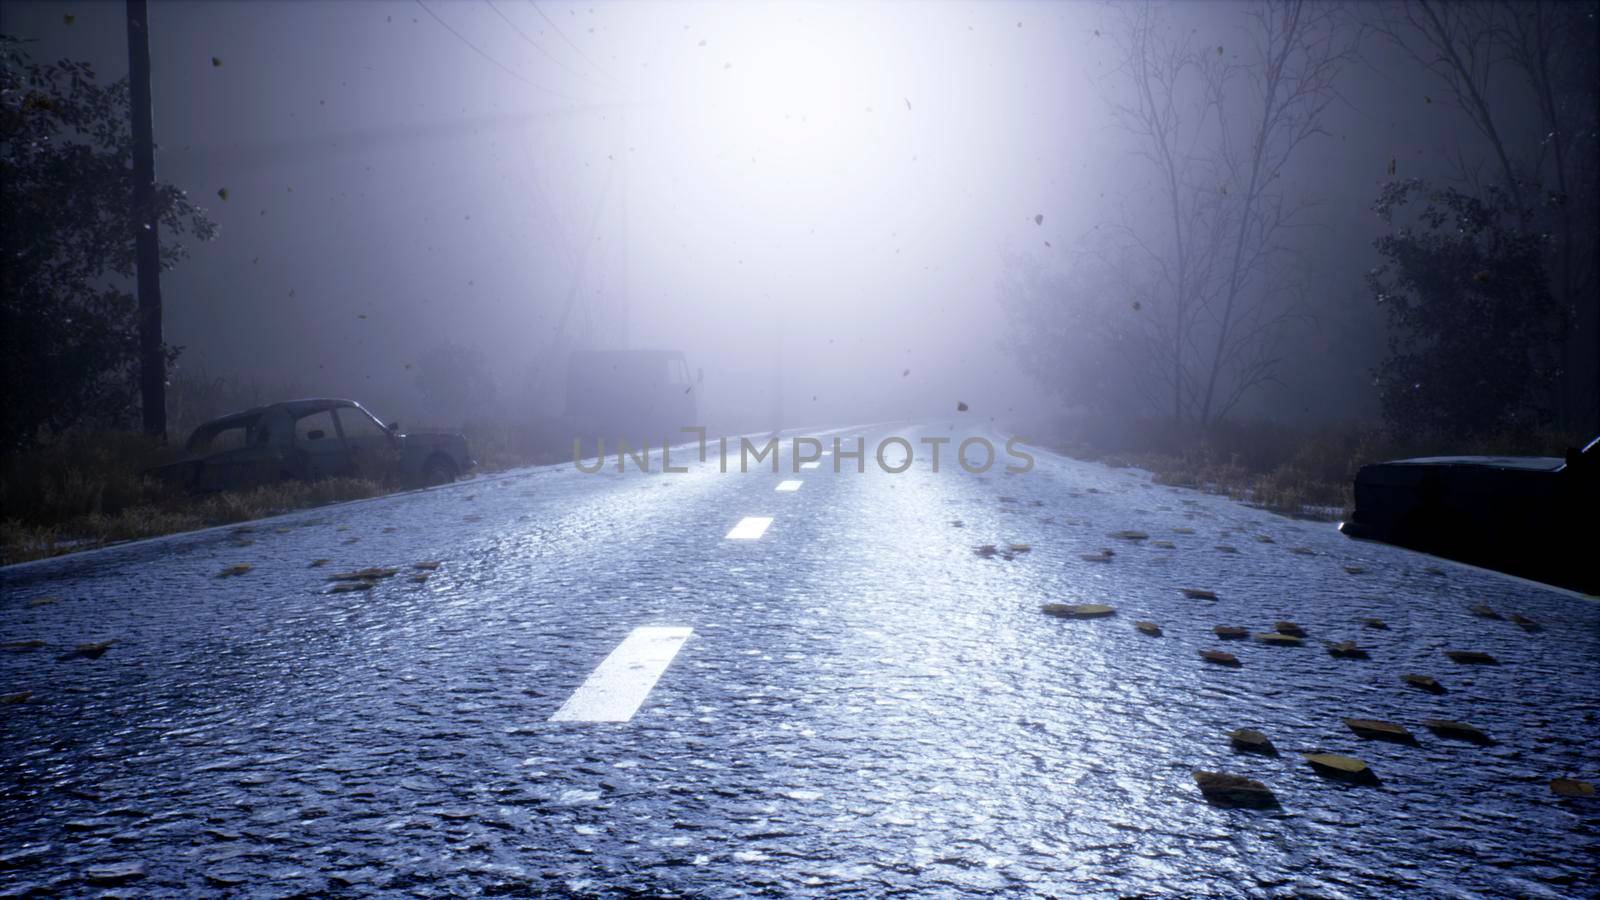 Foggy mystical abandoned road with abandoned cars. View of an abandoned apocalyptic foggy road.